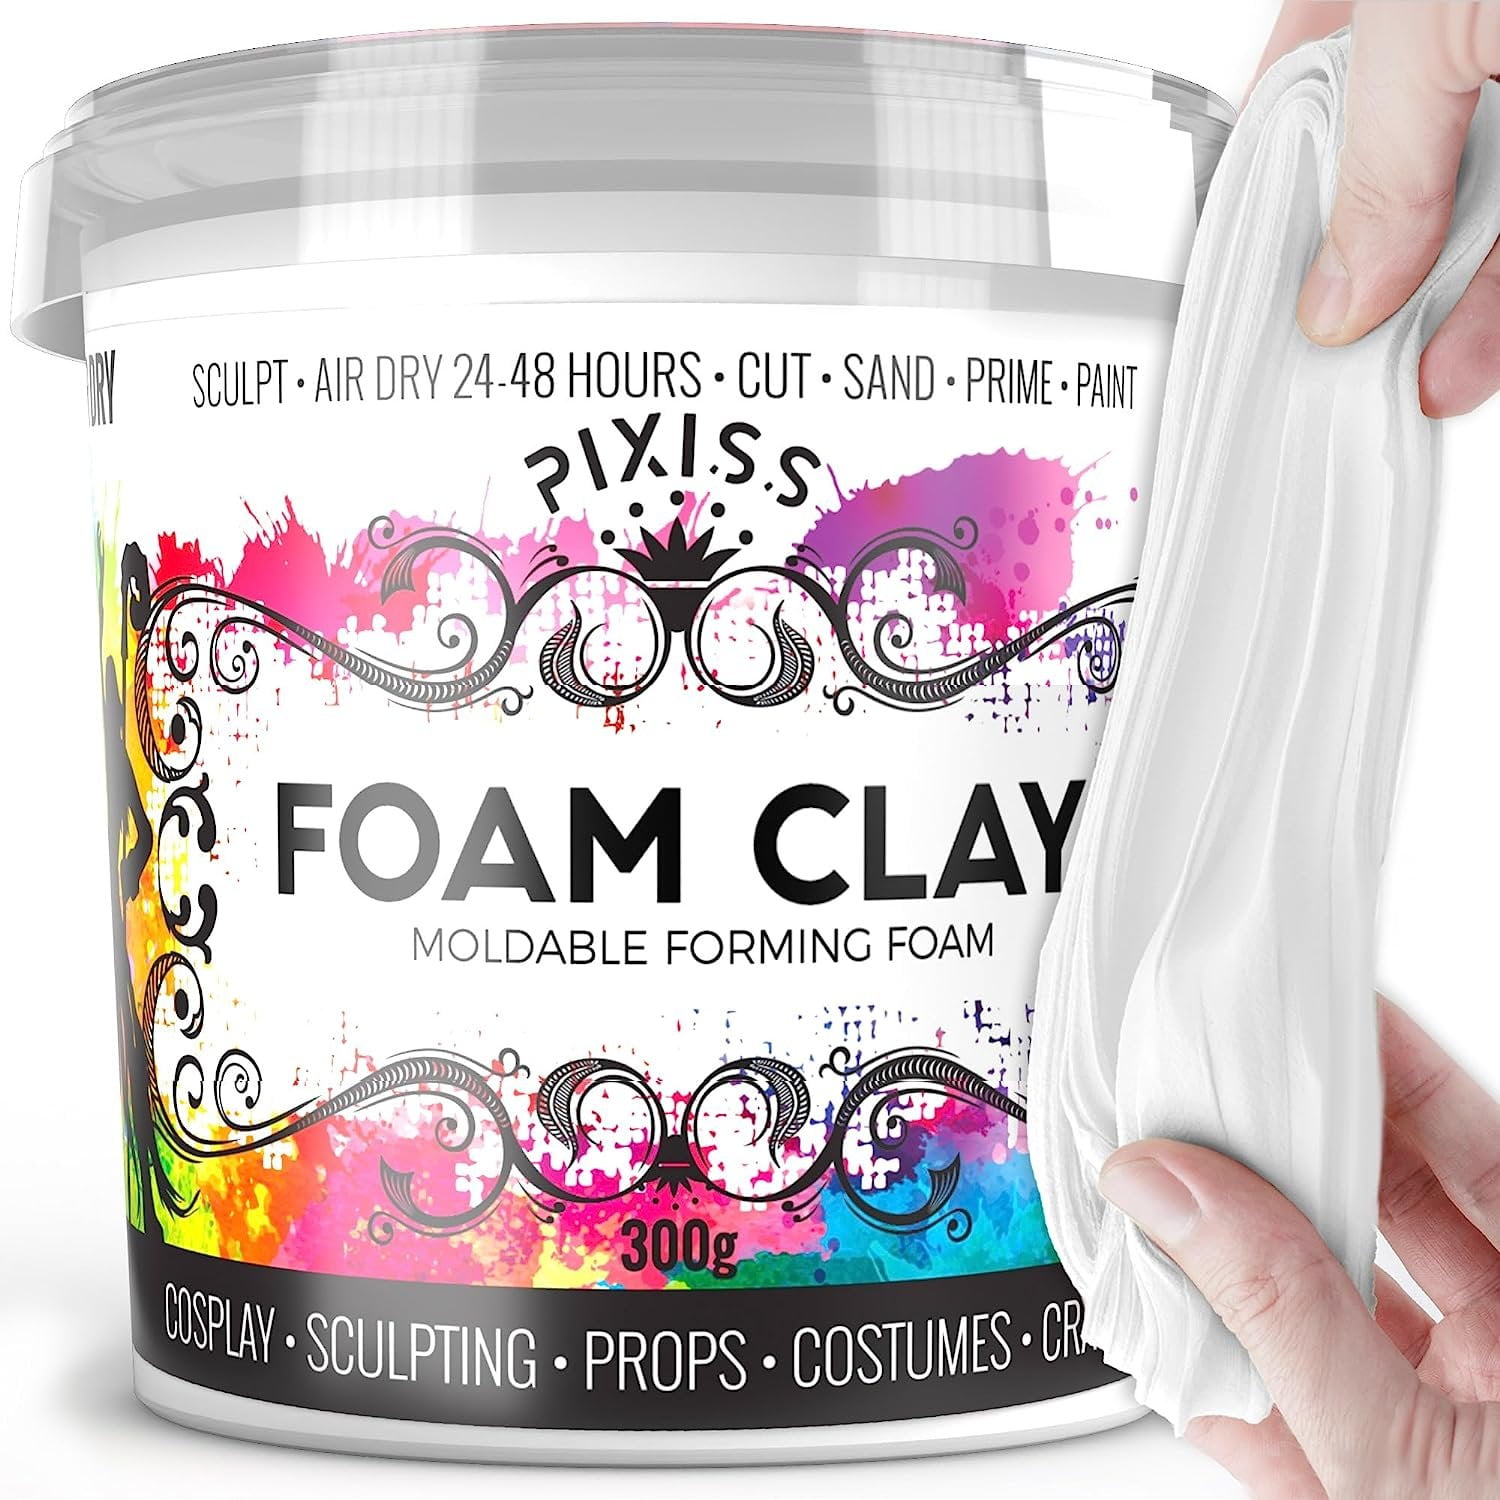  Cosplay Foam Sculpting Clay Set (White 300g and Black300g) -  Pixiss Modeling Foam Clay Air Dry, 300 Grams Air Drying Clay for Sculpting  - Air Dry Foam Clay for Foam Clay